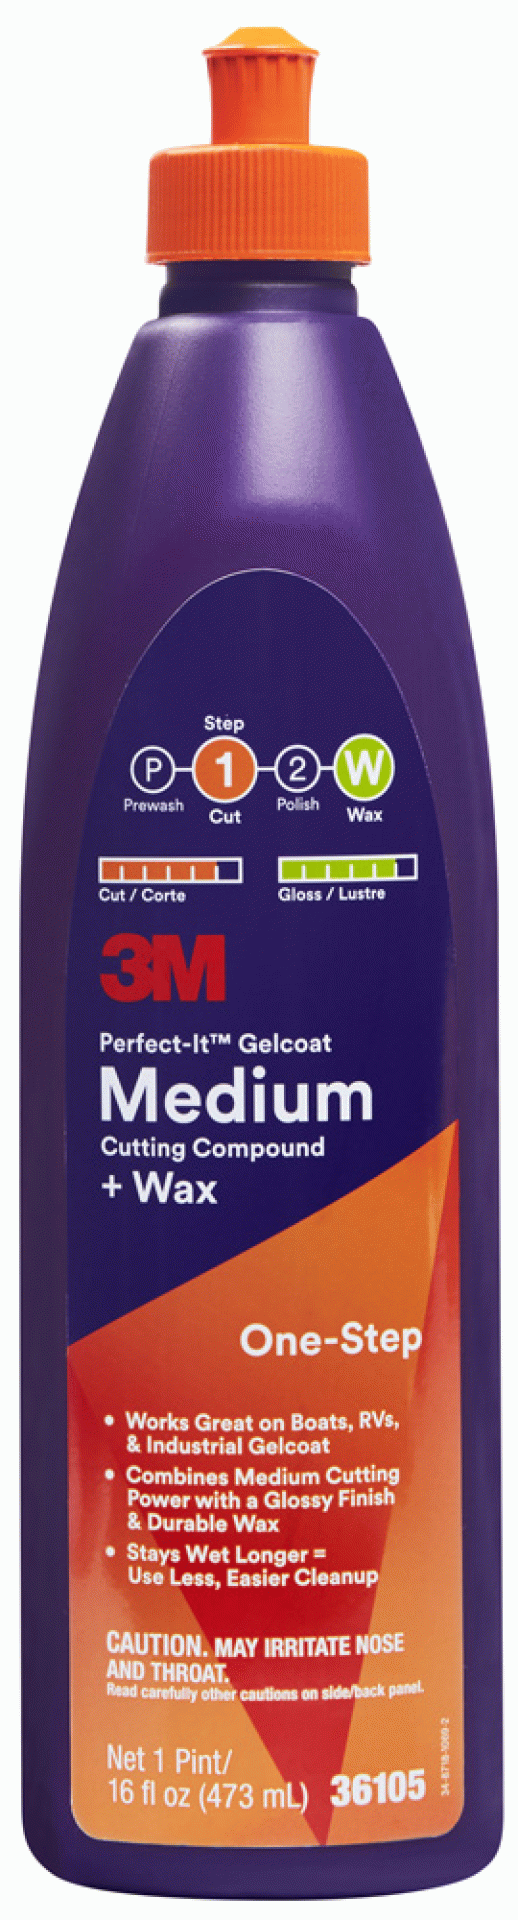 3M Company | 36105 | Perfect-It GelCoat Medium Cutting Compound and Wax - 16 Oz.